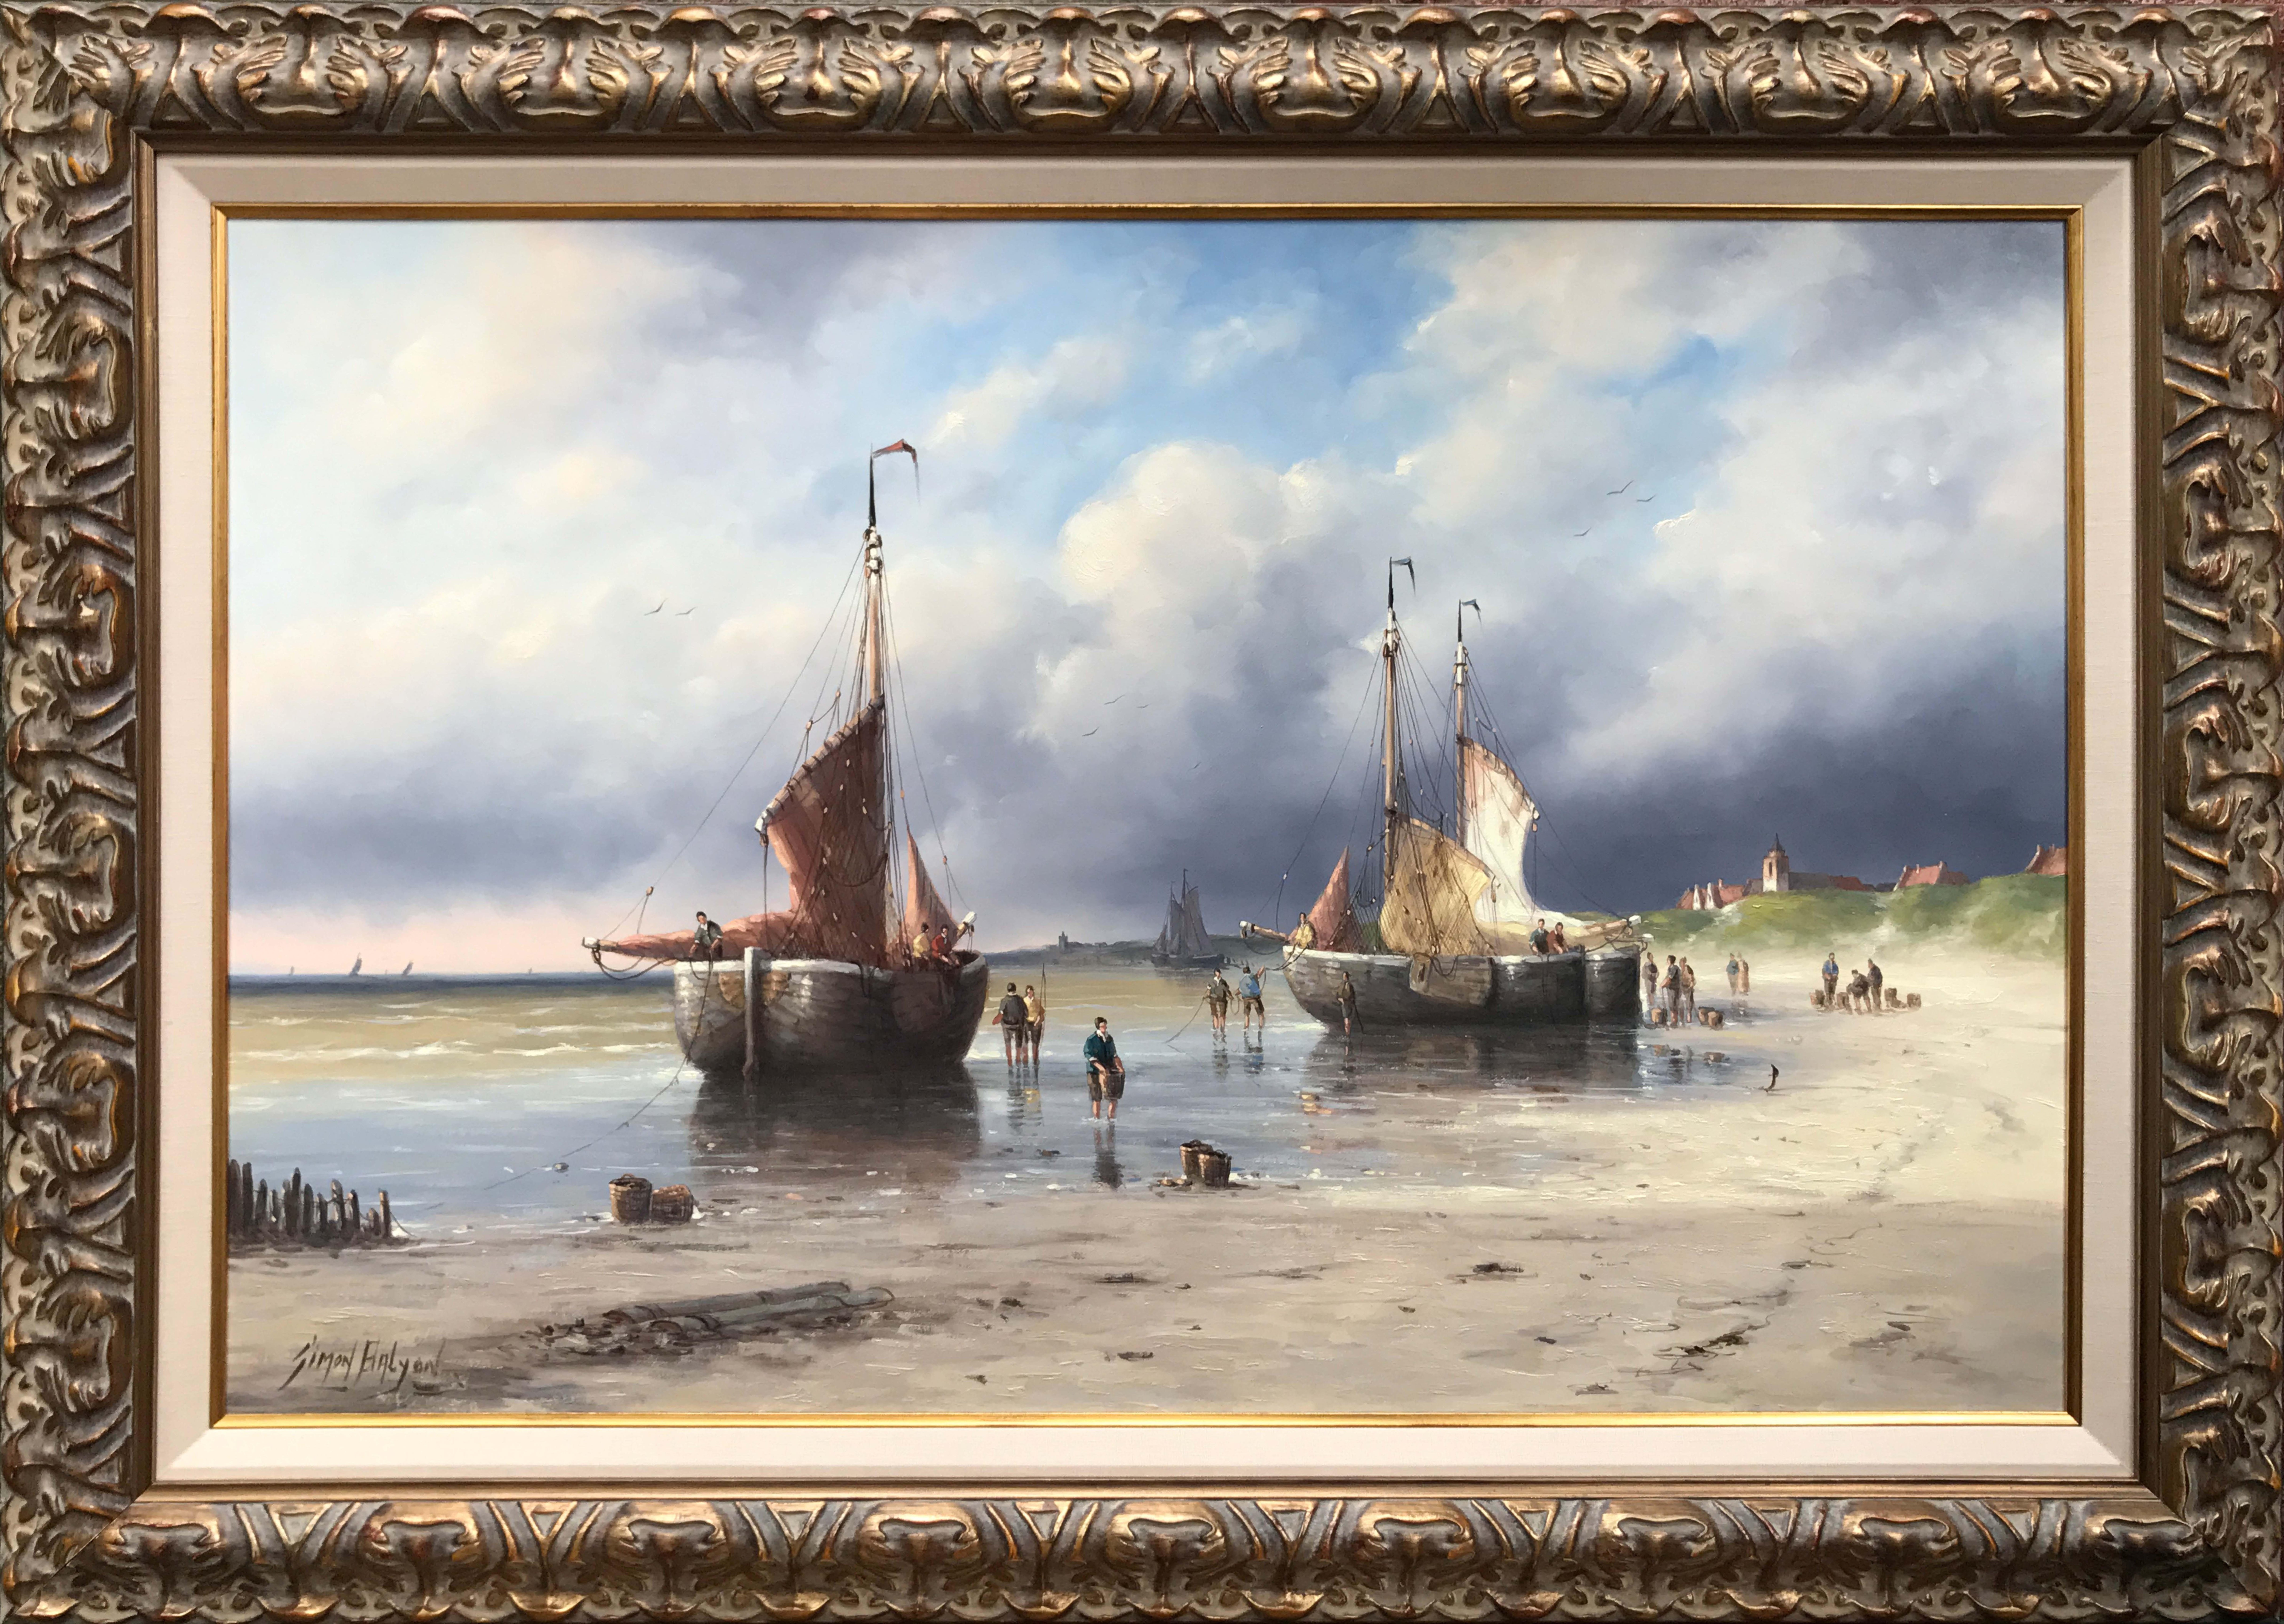 Working on the Dutch Coastline - Painting by Simon Balyon